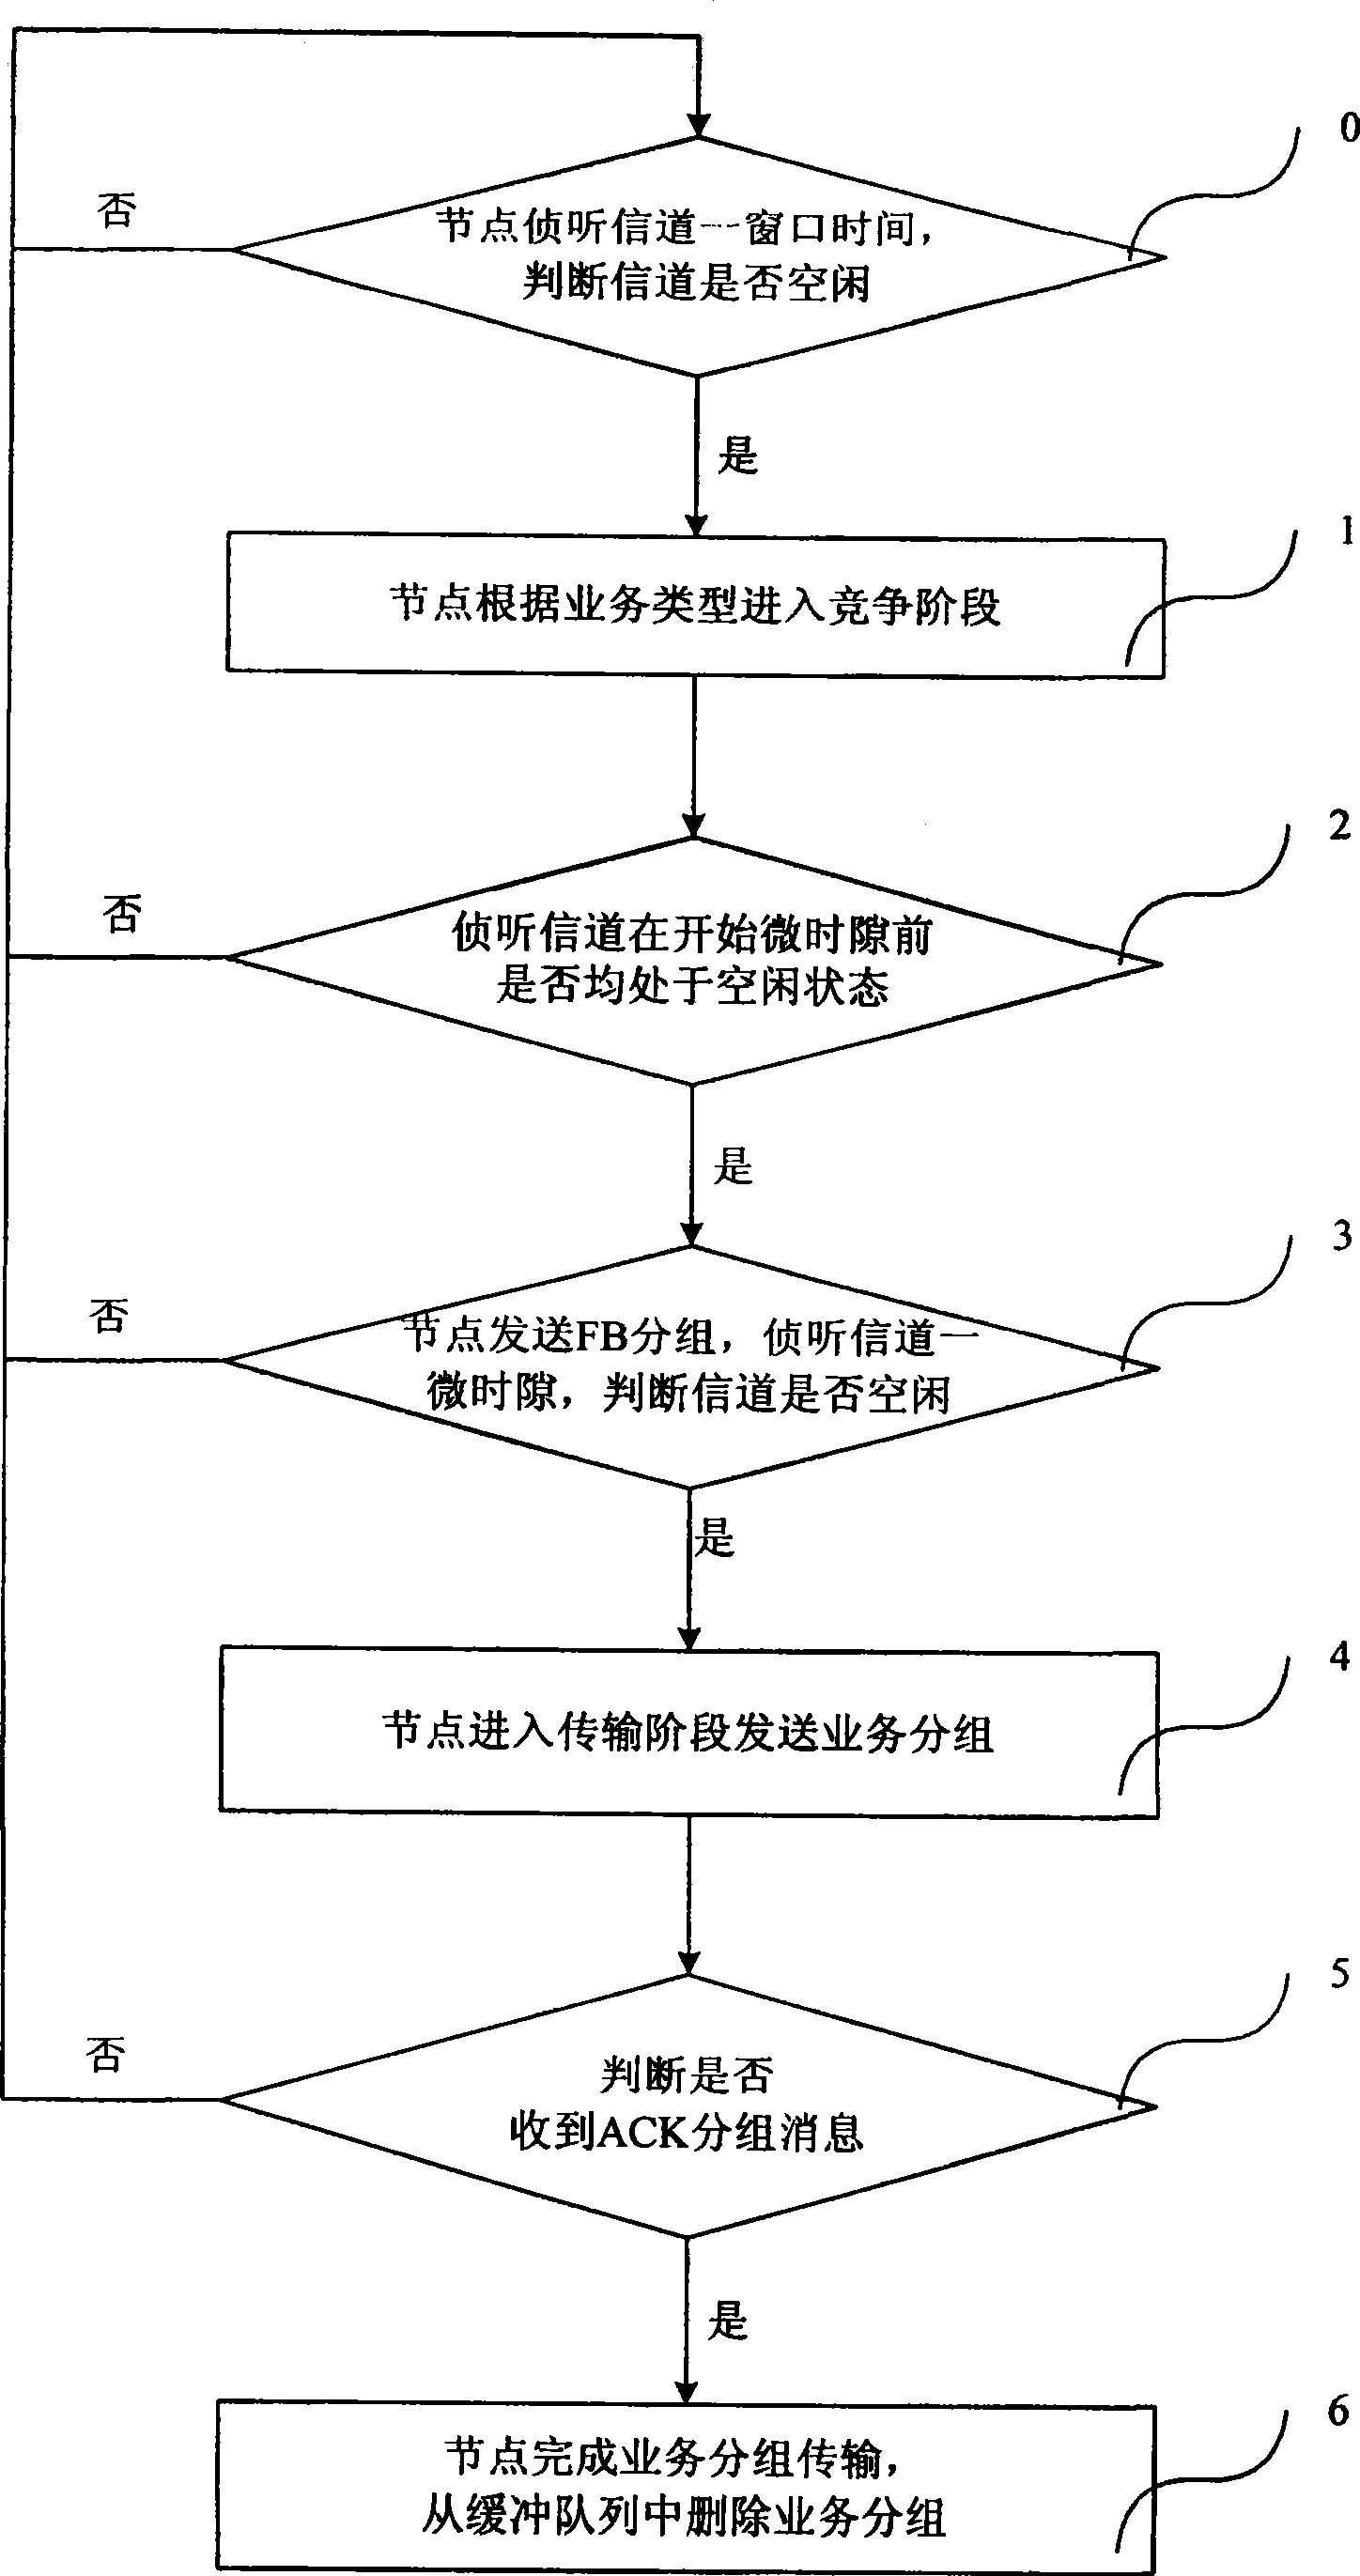 Multi-address access method for supporting service quality